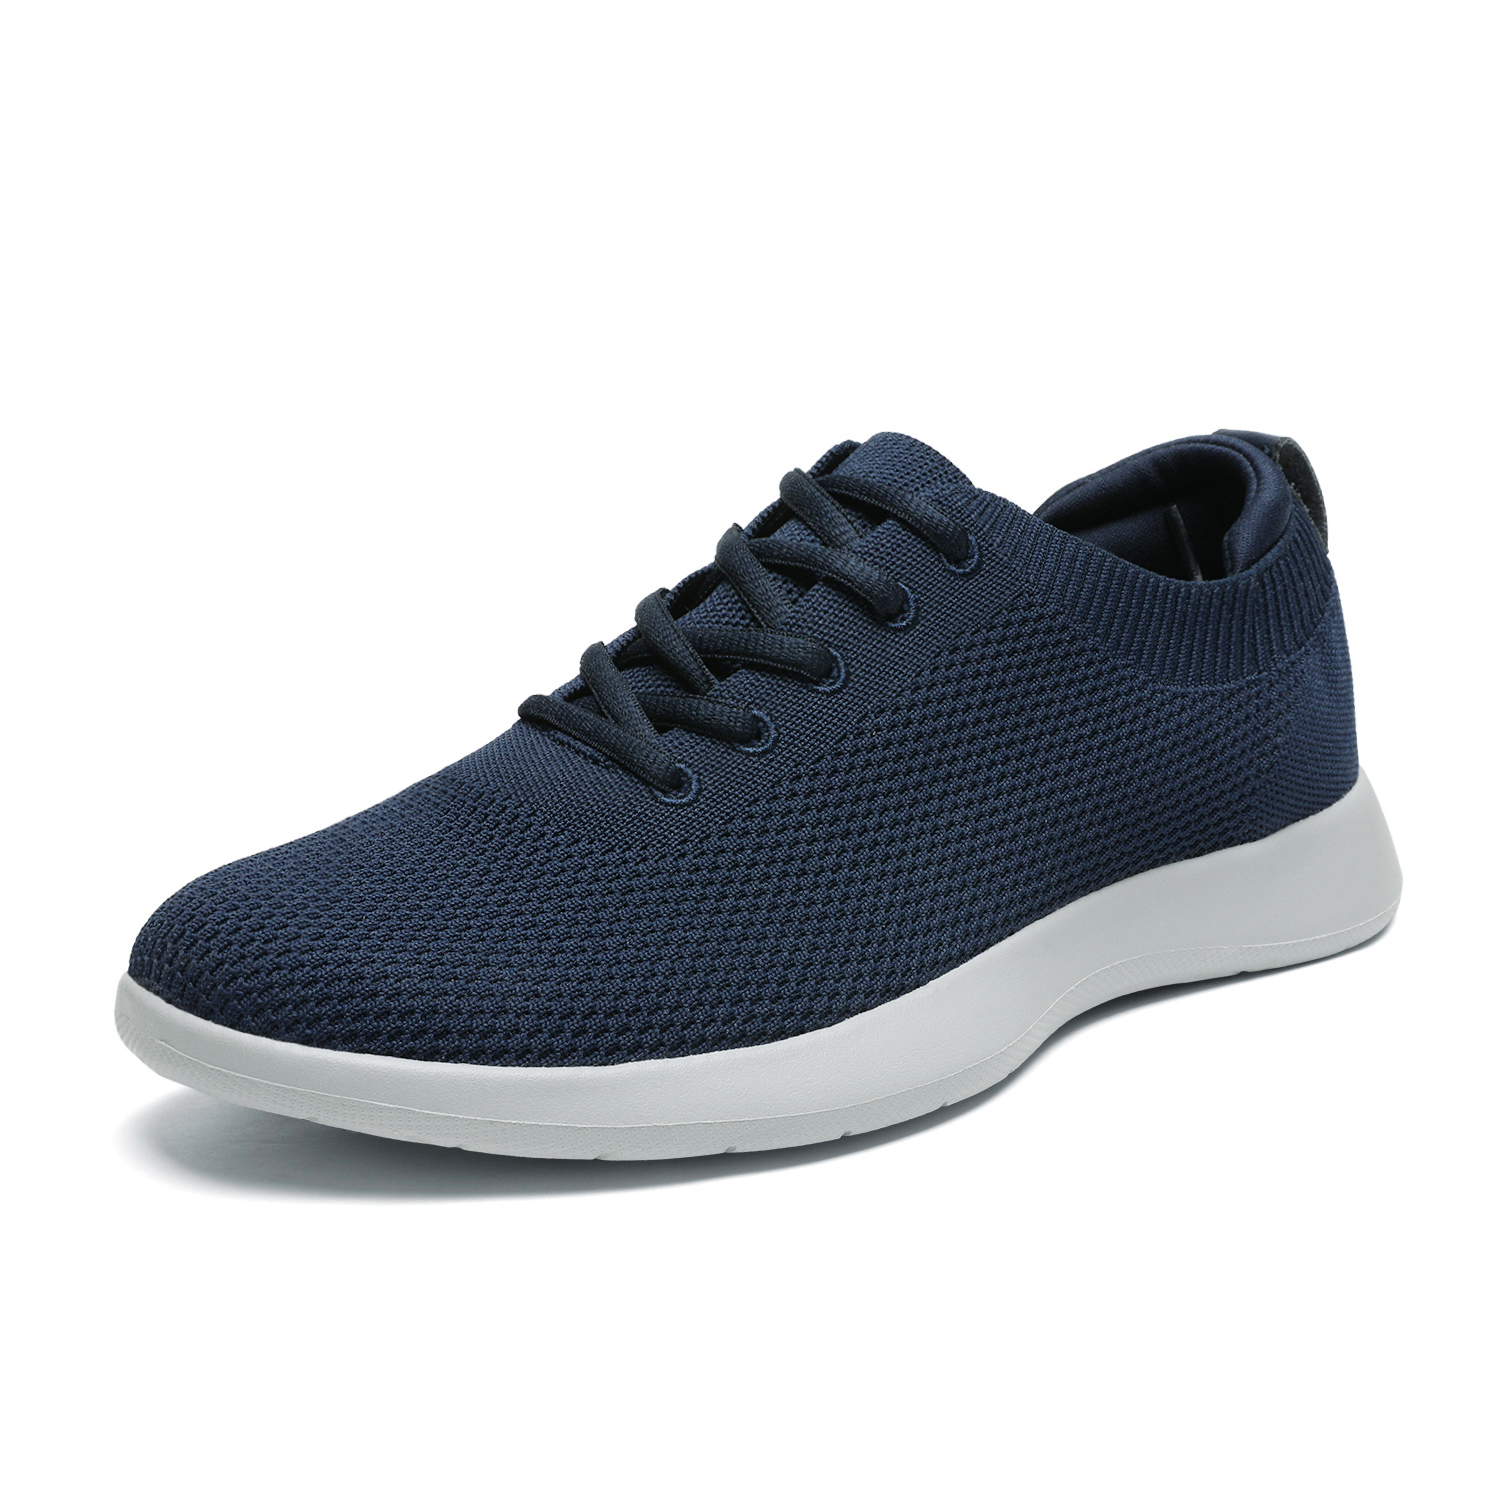 Bruno Marc Mens Fashion Comfort Walking Shoes Breathable Fashion Sneaker Casual Shoe Size 6.5-13 LEGEND-2 NAVY Size 10 - image 1 of 5